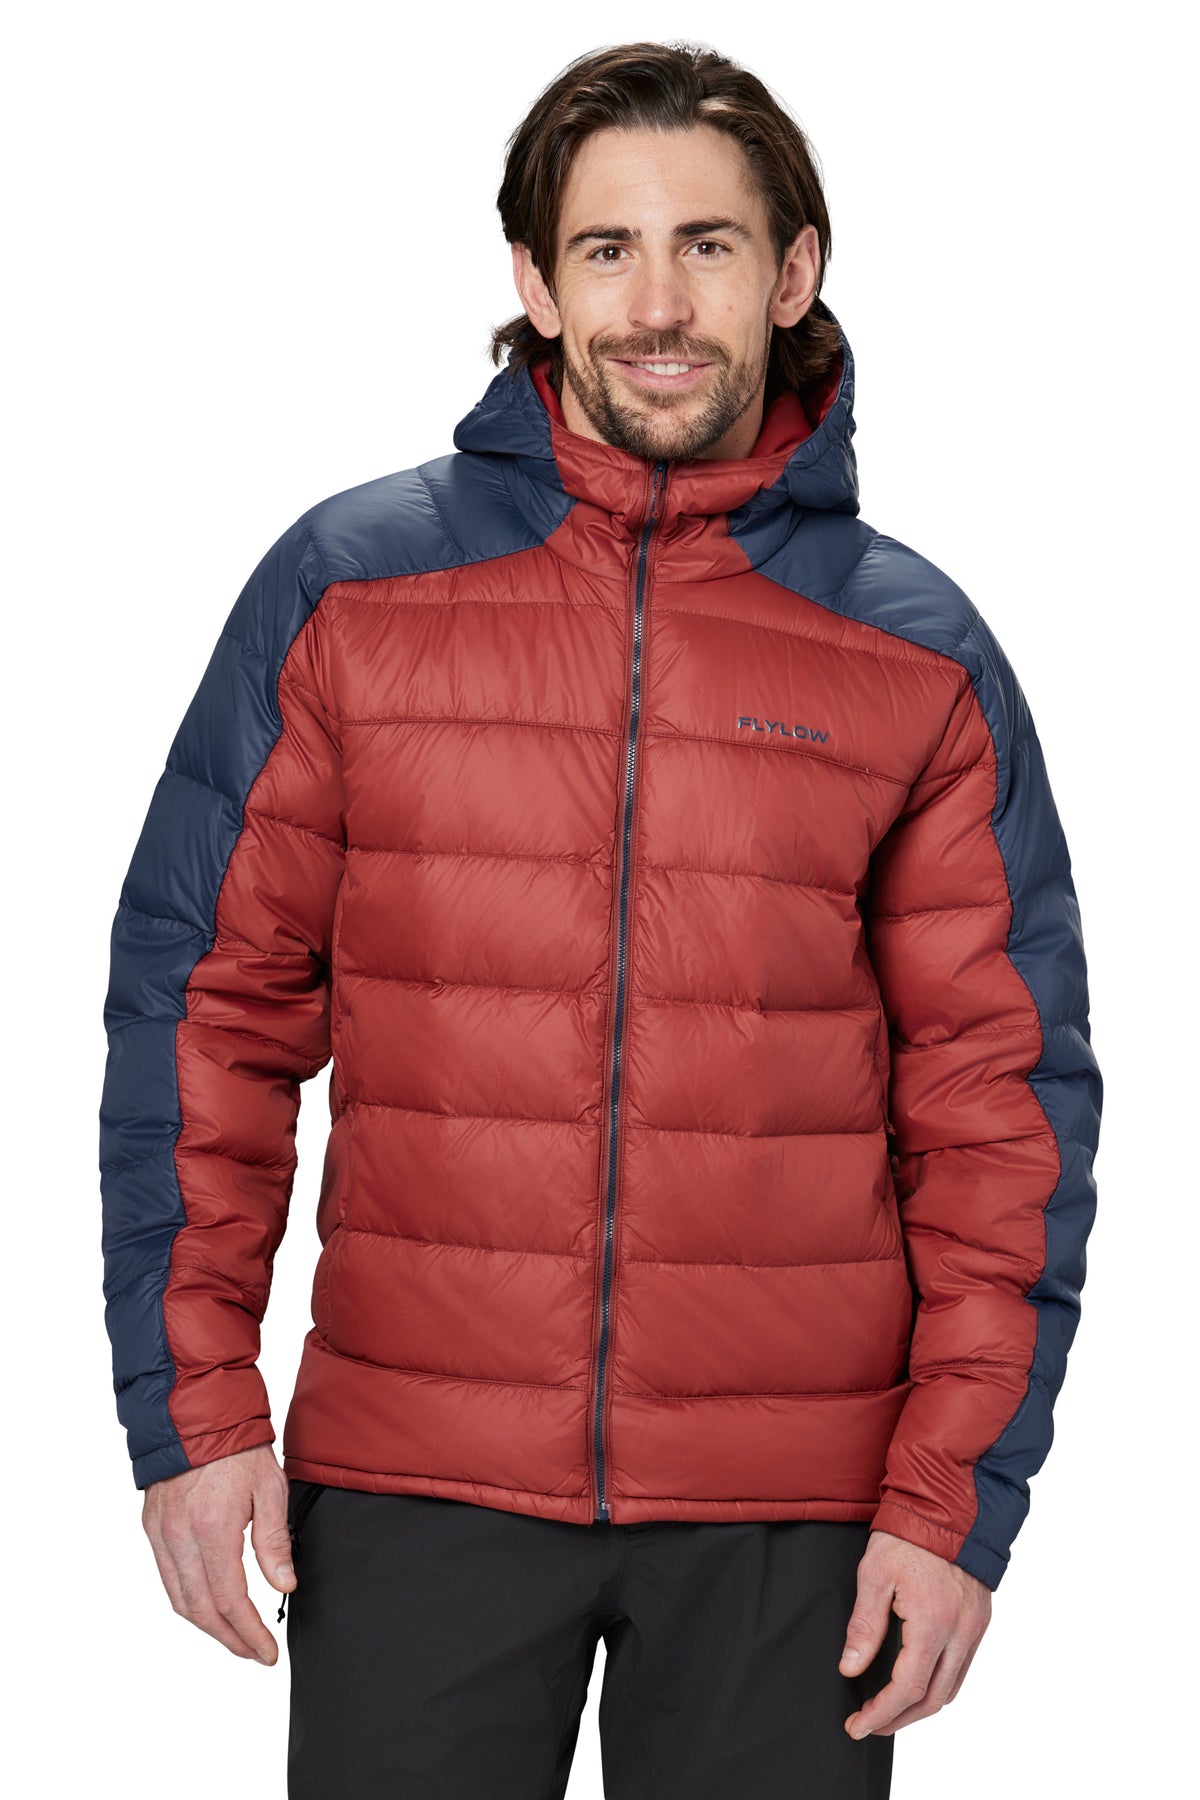 WATER-REPELLENT FEATHER AND DOWN PUFFER JACKET